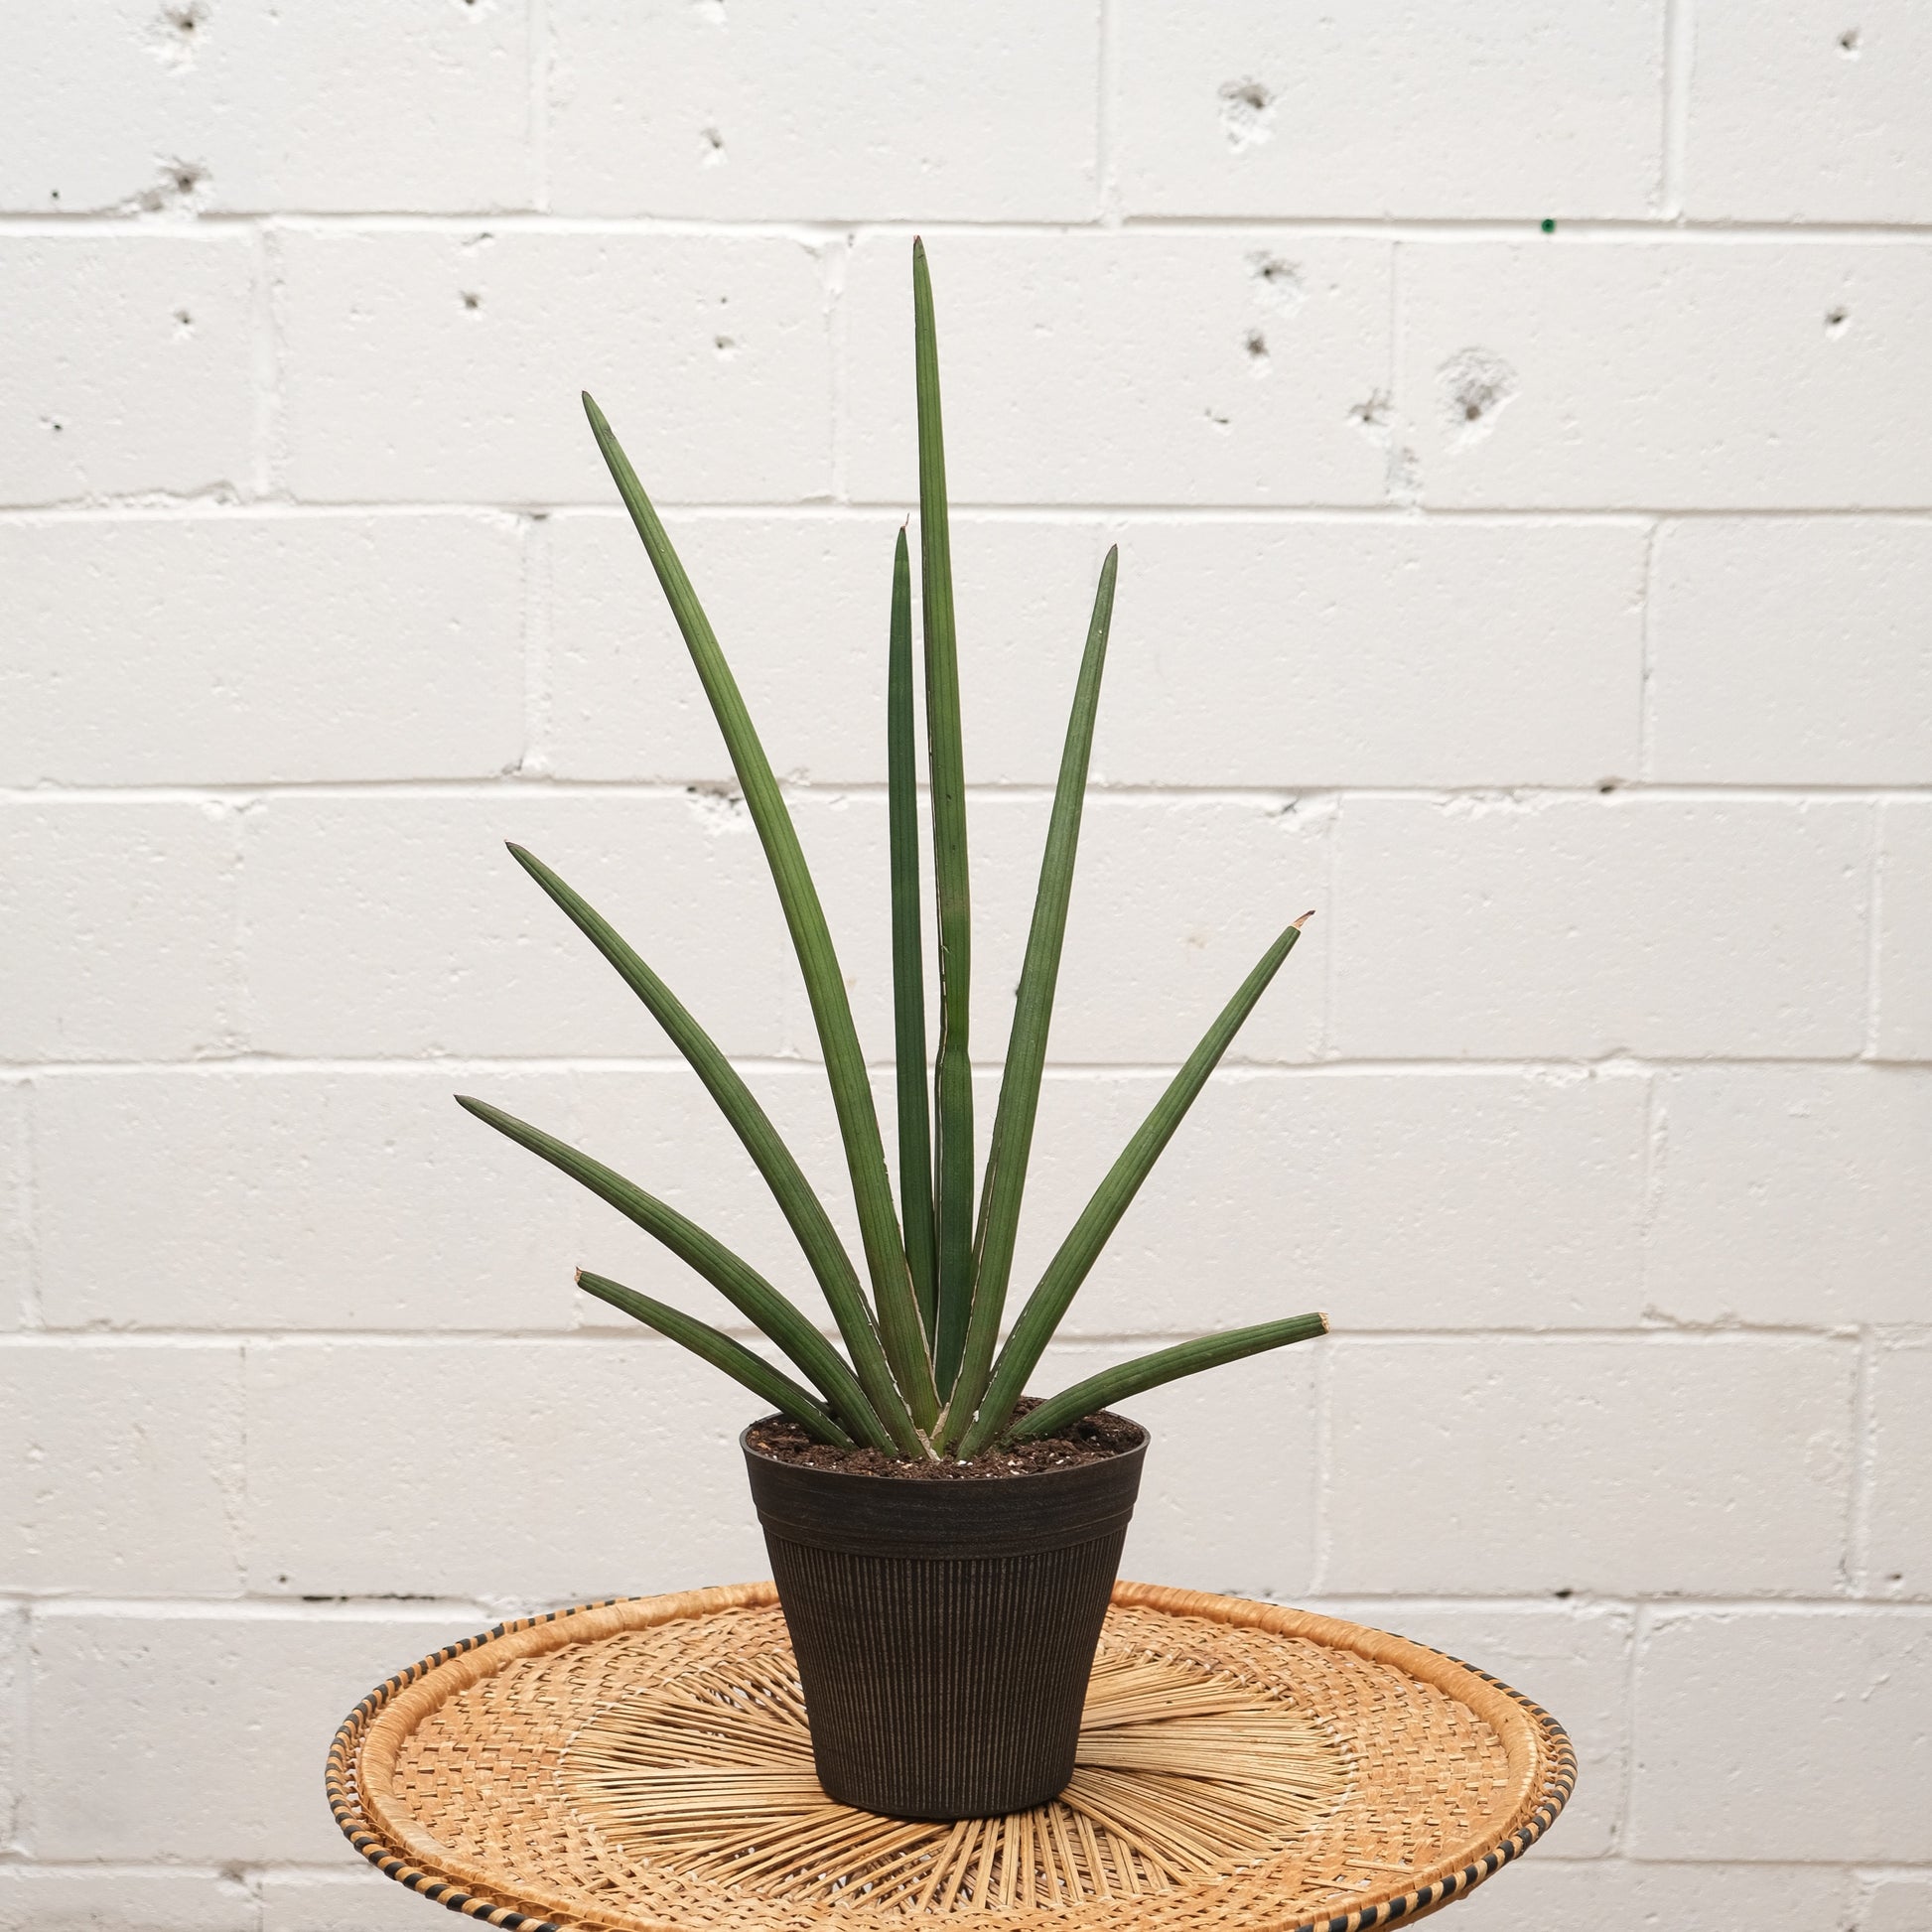 Fantail Snake Plant (Sansevieria) in a 7 inch pot. Indoor plant for sale by Promise Supply for delivery and pickup in Toronto